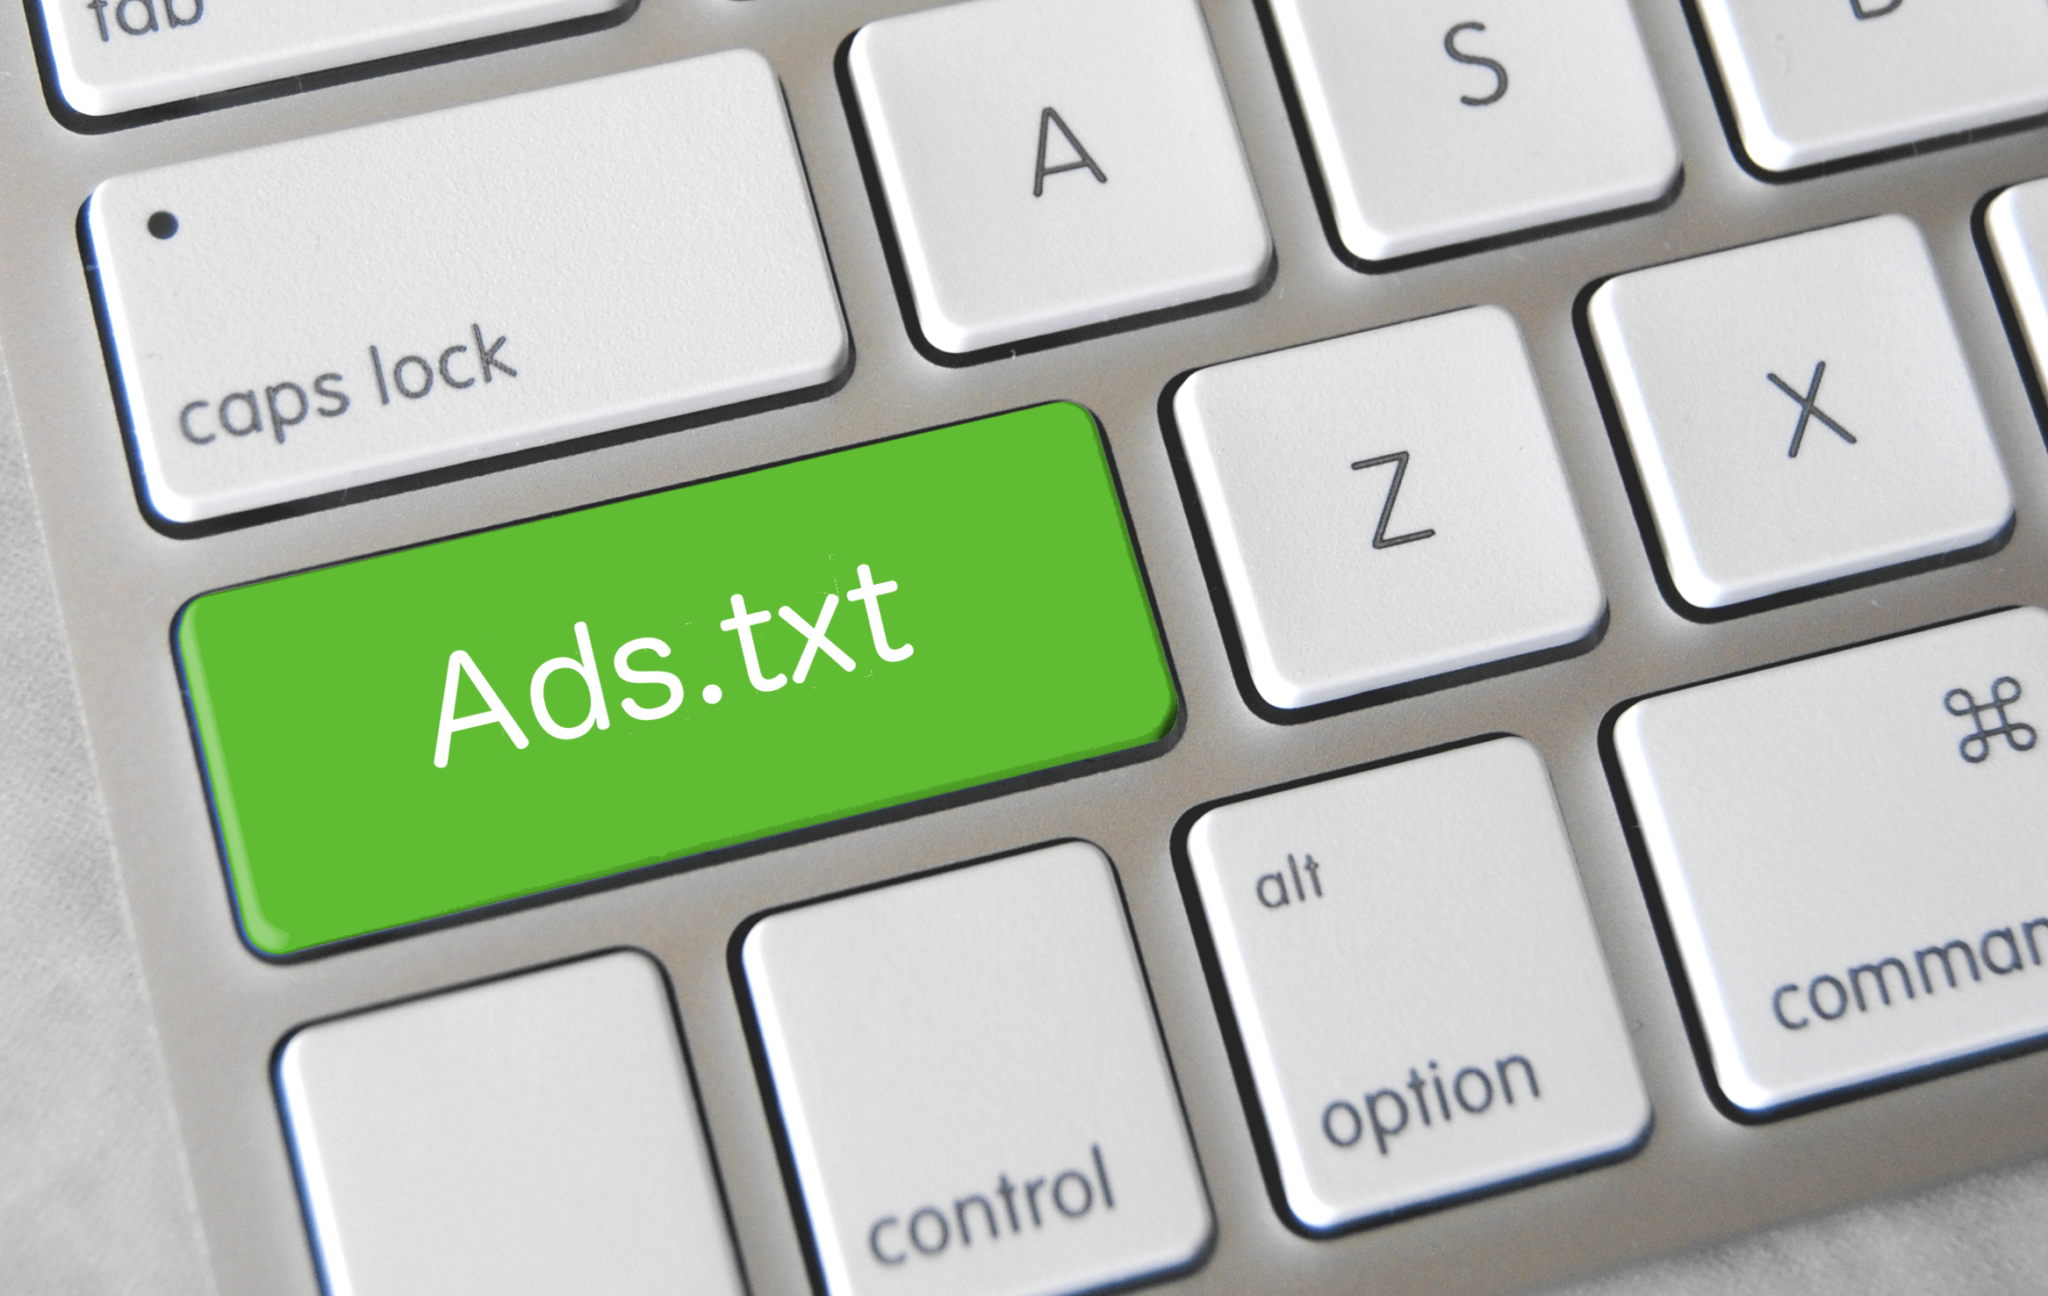 Google to introduce detailed ads.txt reporting and to change Active View Viewable Time in DV360